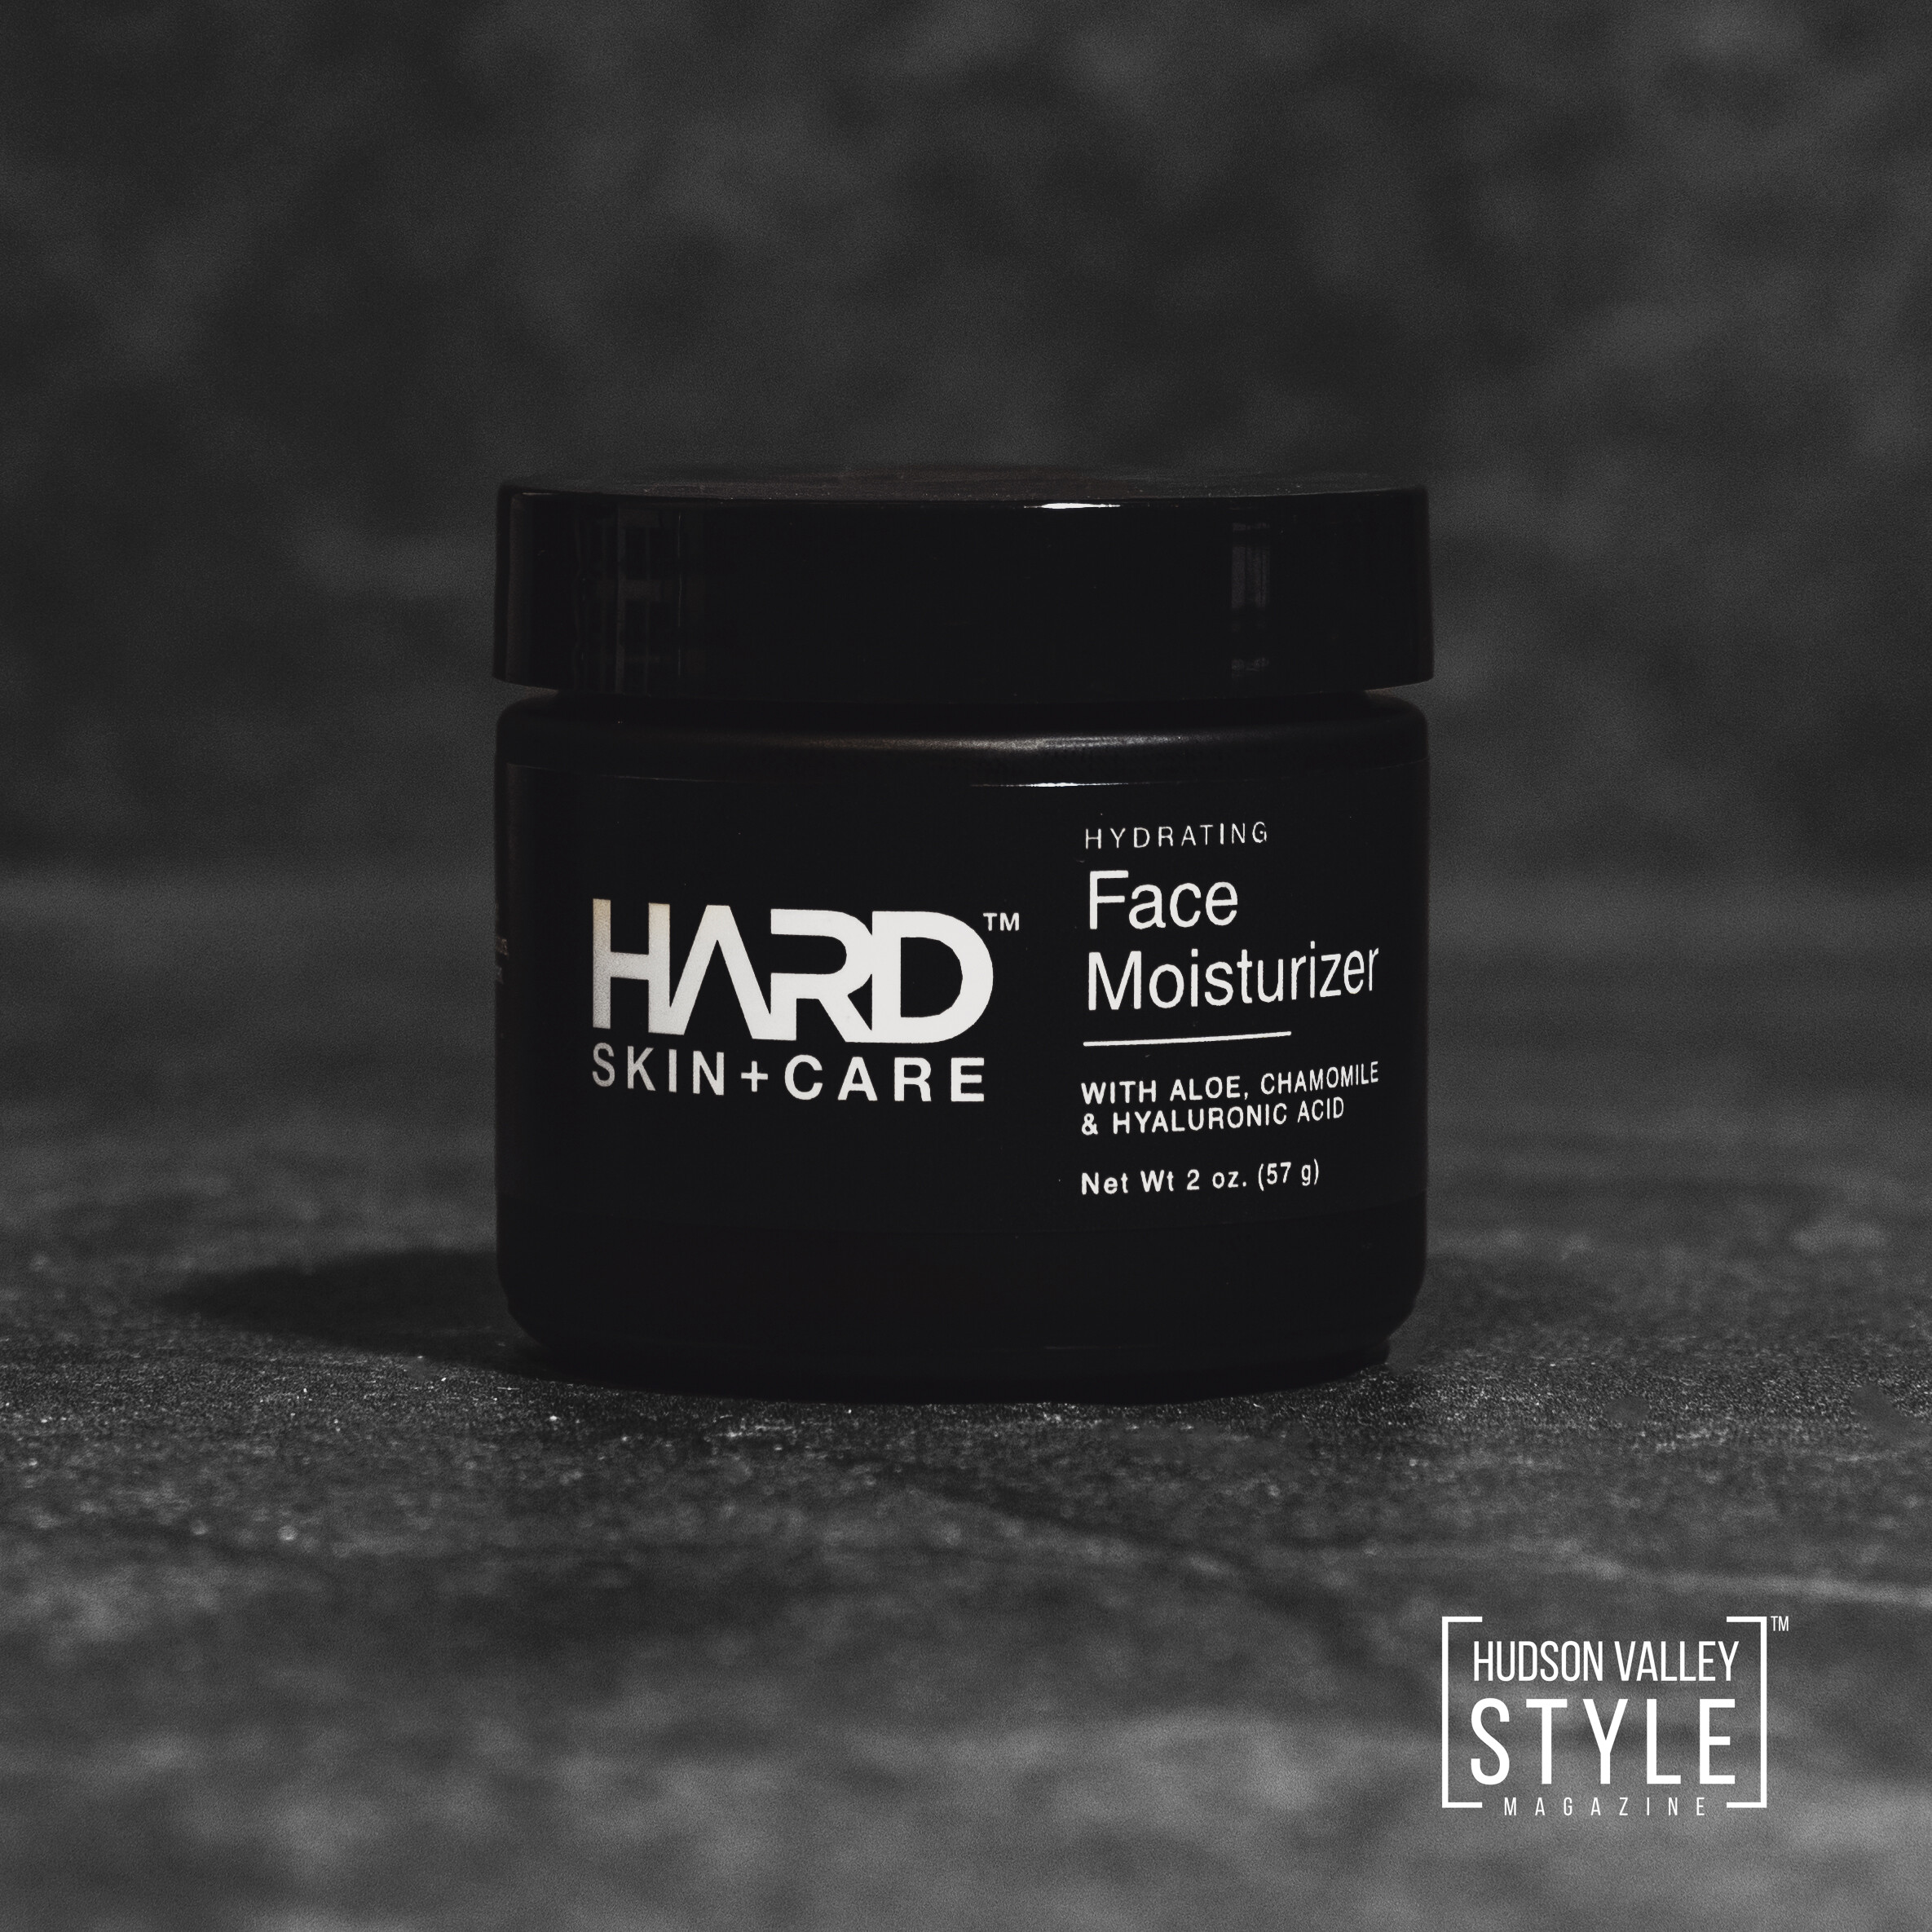 Skincare for Men Demystified: How Five Common Ingredients Help Your Skin – Presented by HARD NEW YORK BRAND – Luxury Skincare for Men